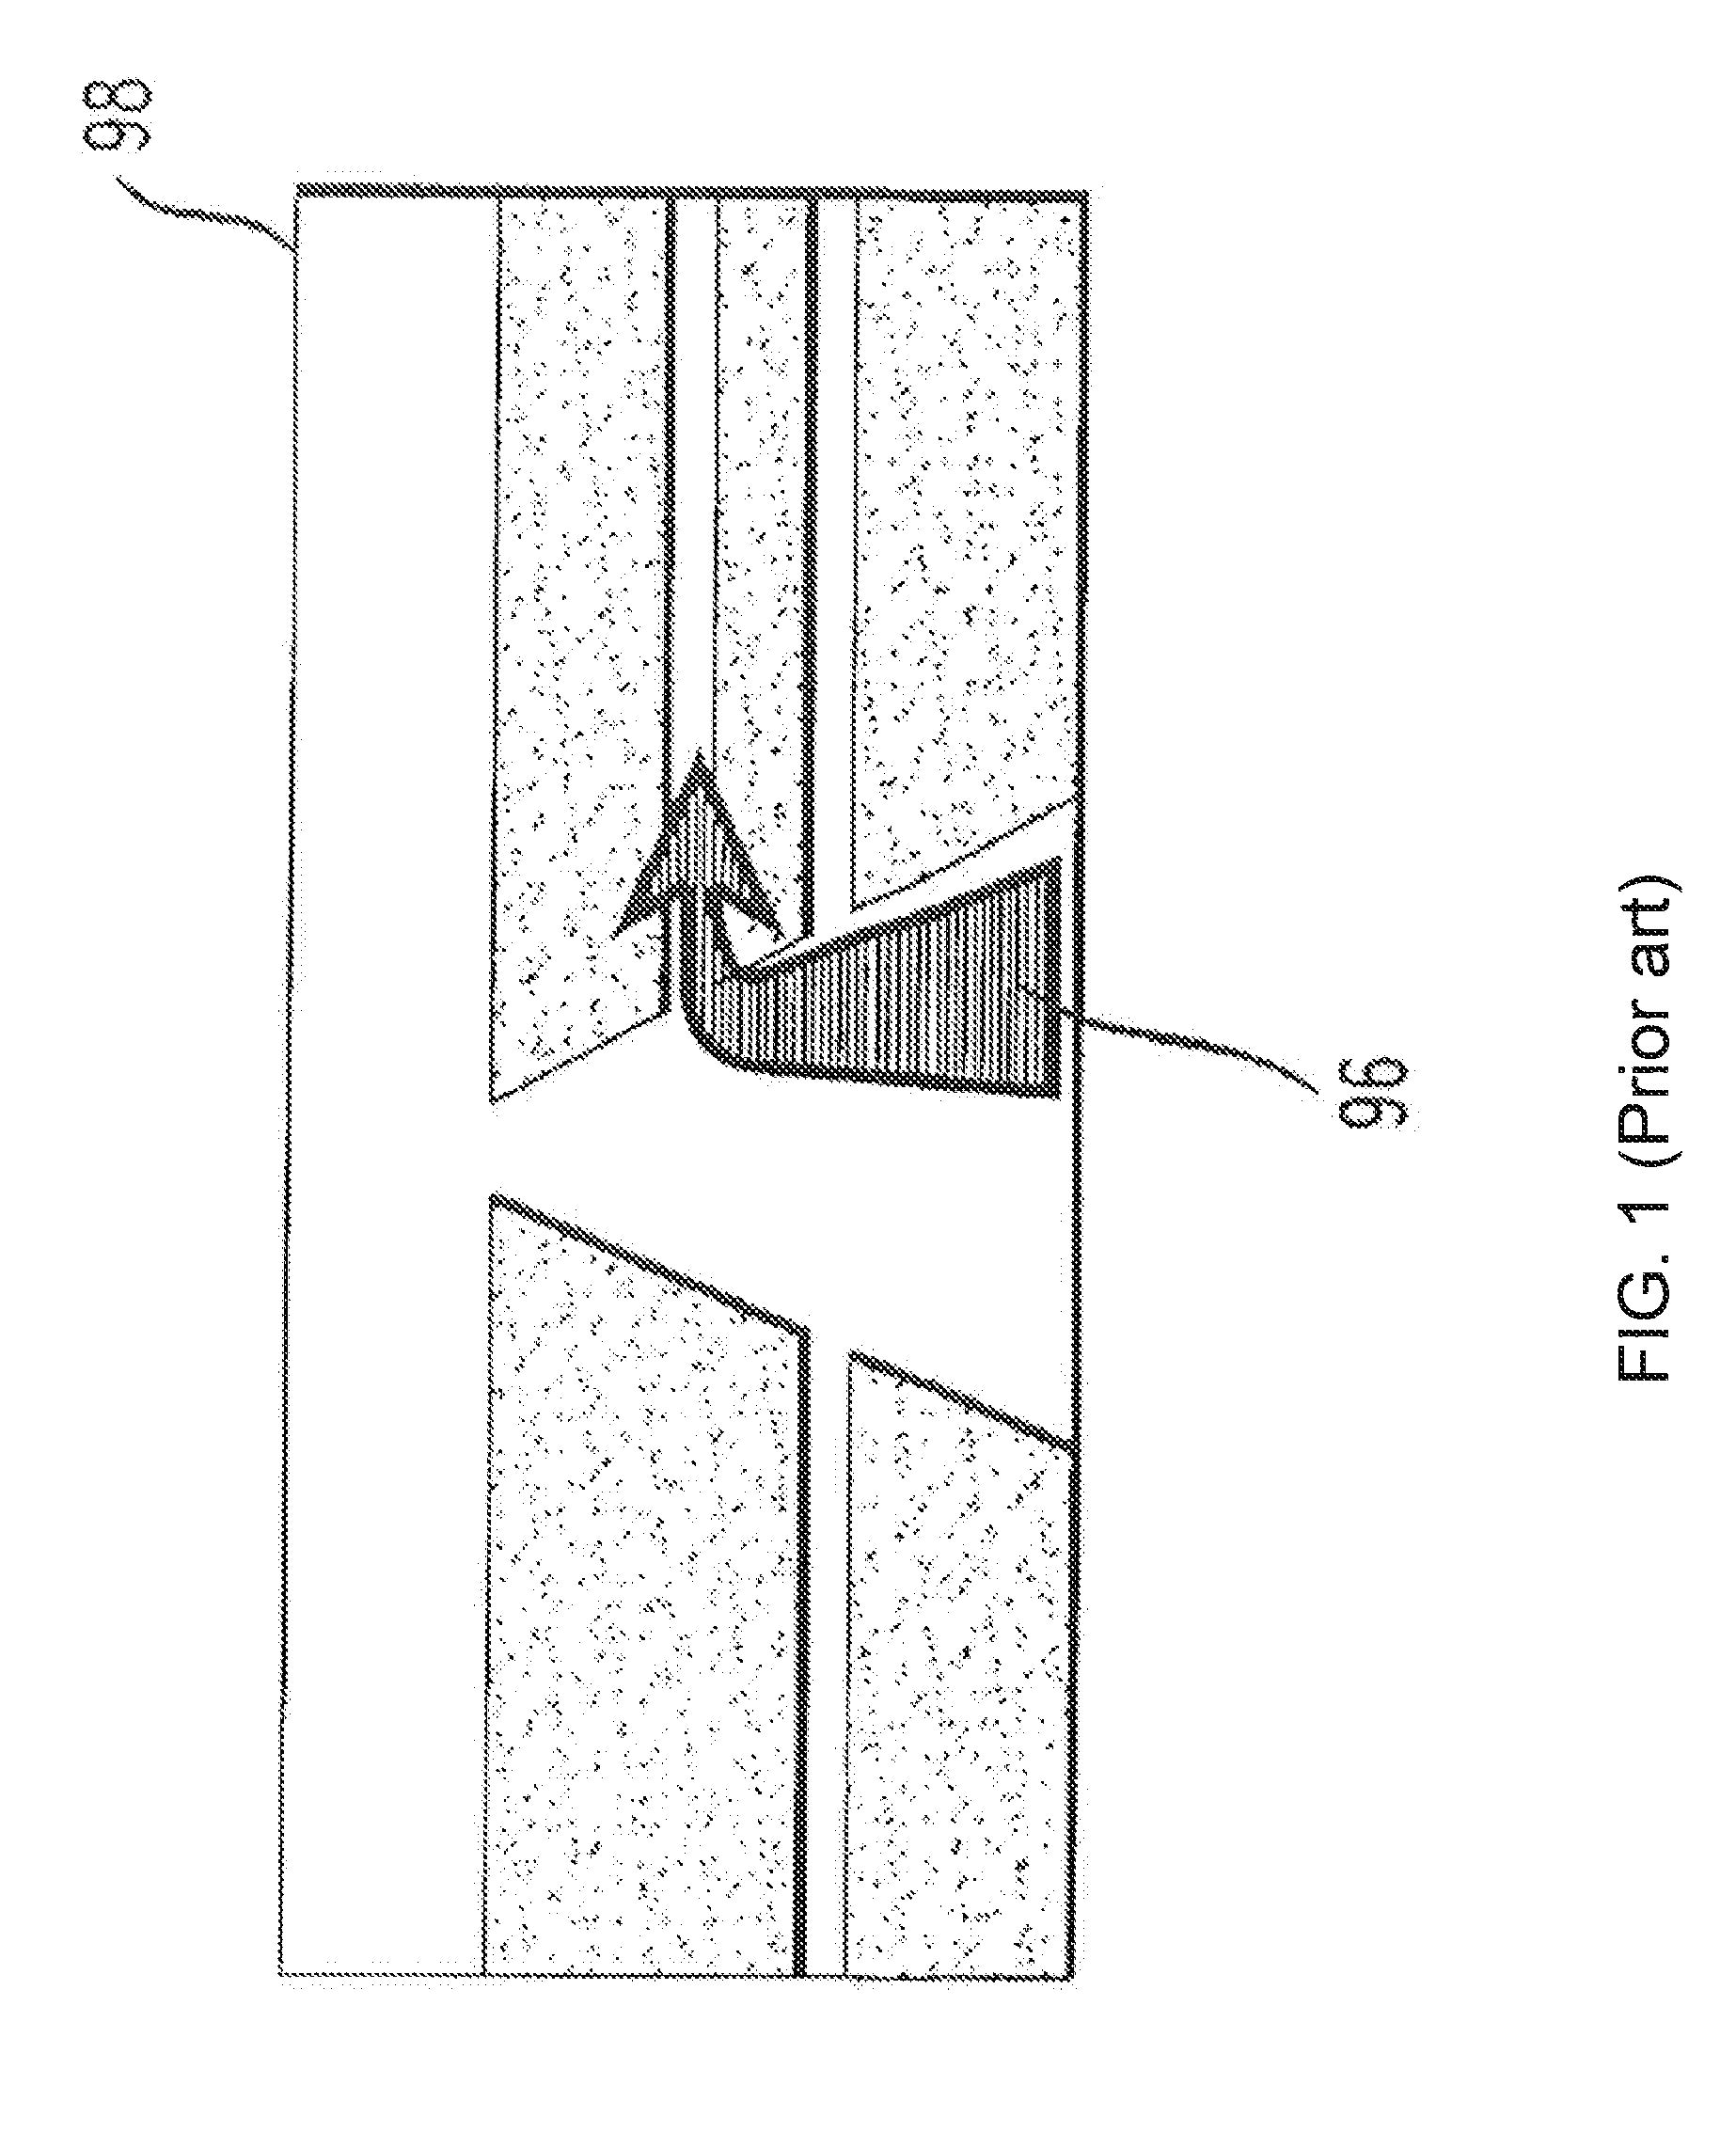 Method and Apparatus for Displaying Three-Dimensional Terrain and Route Guidance